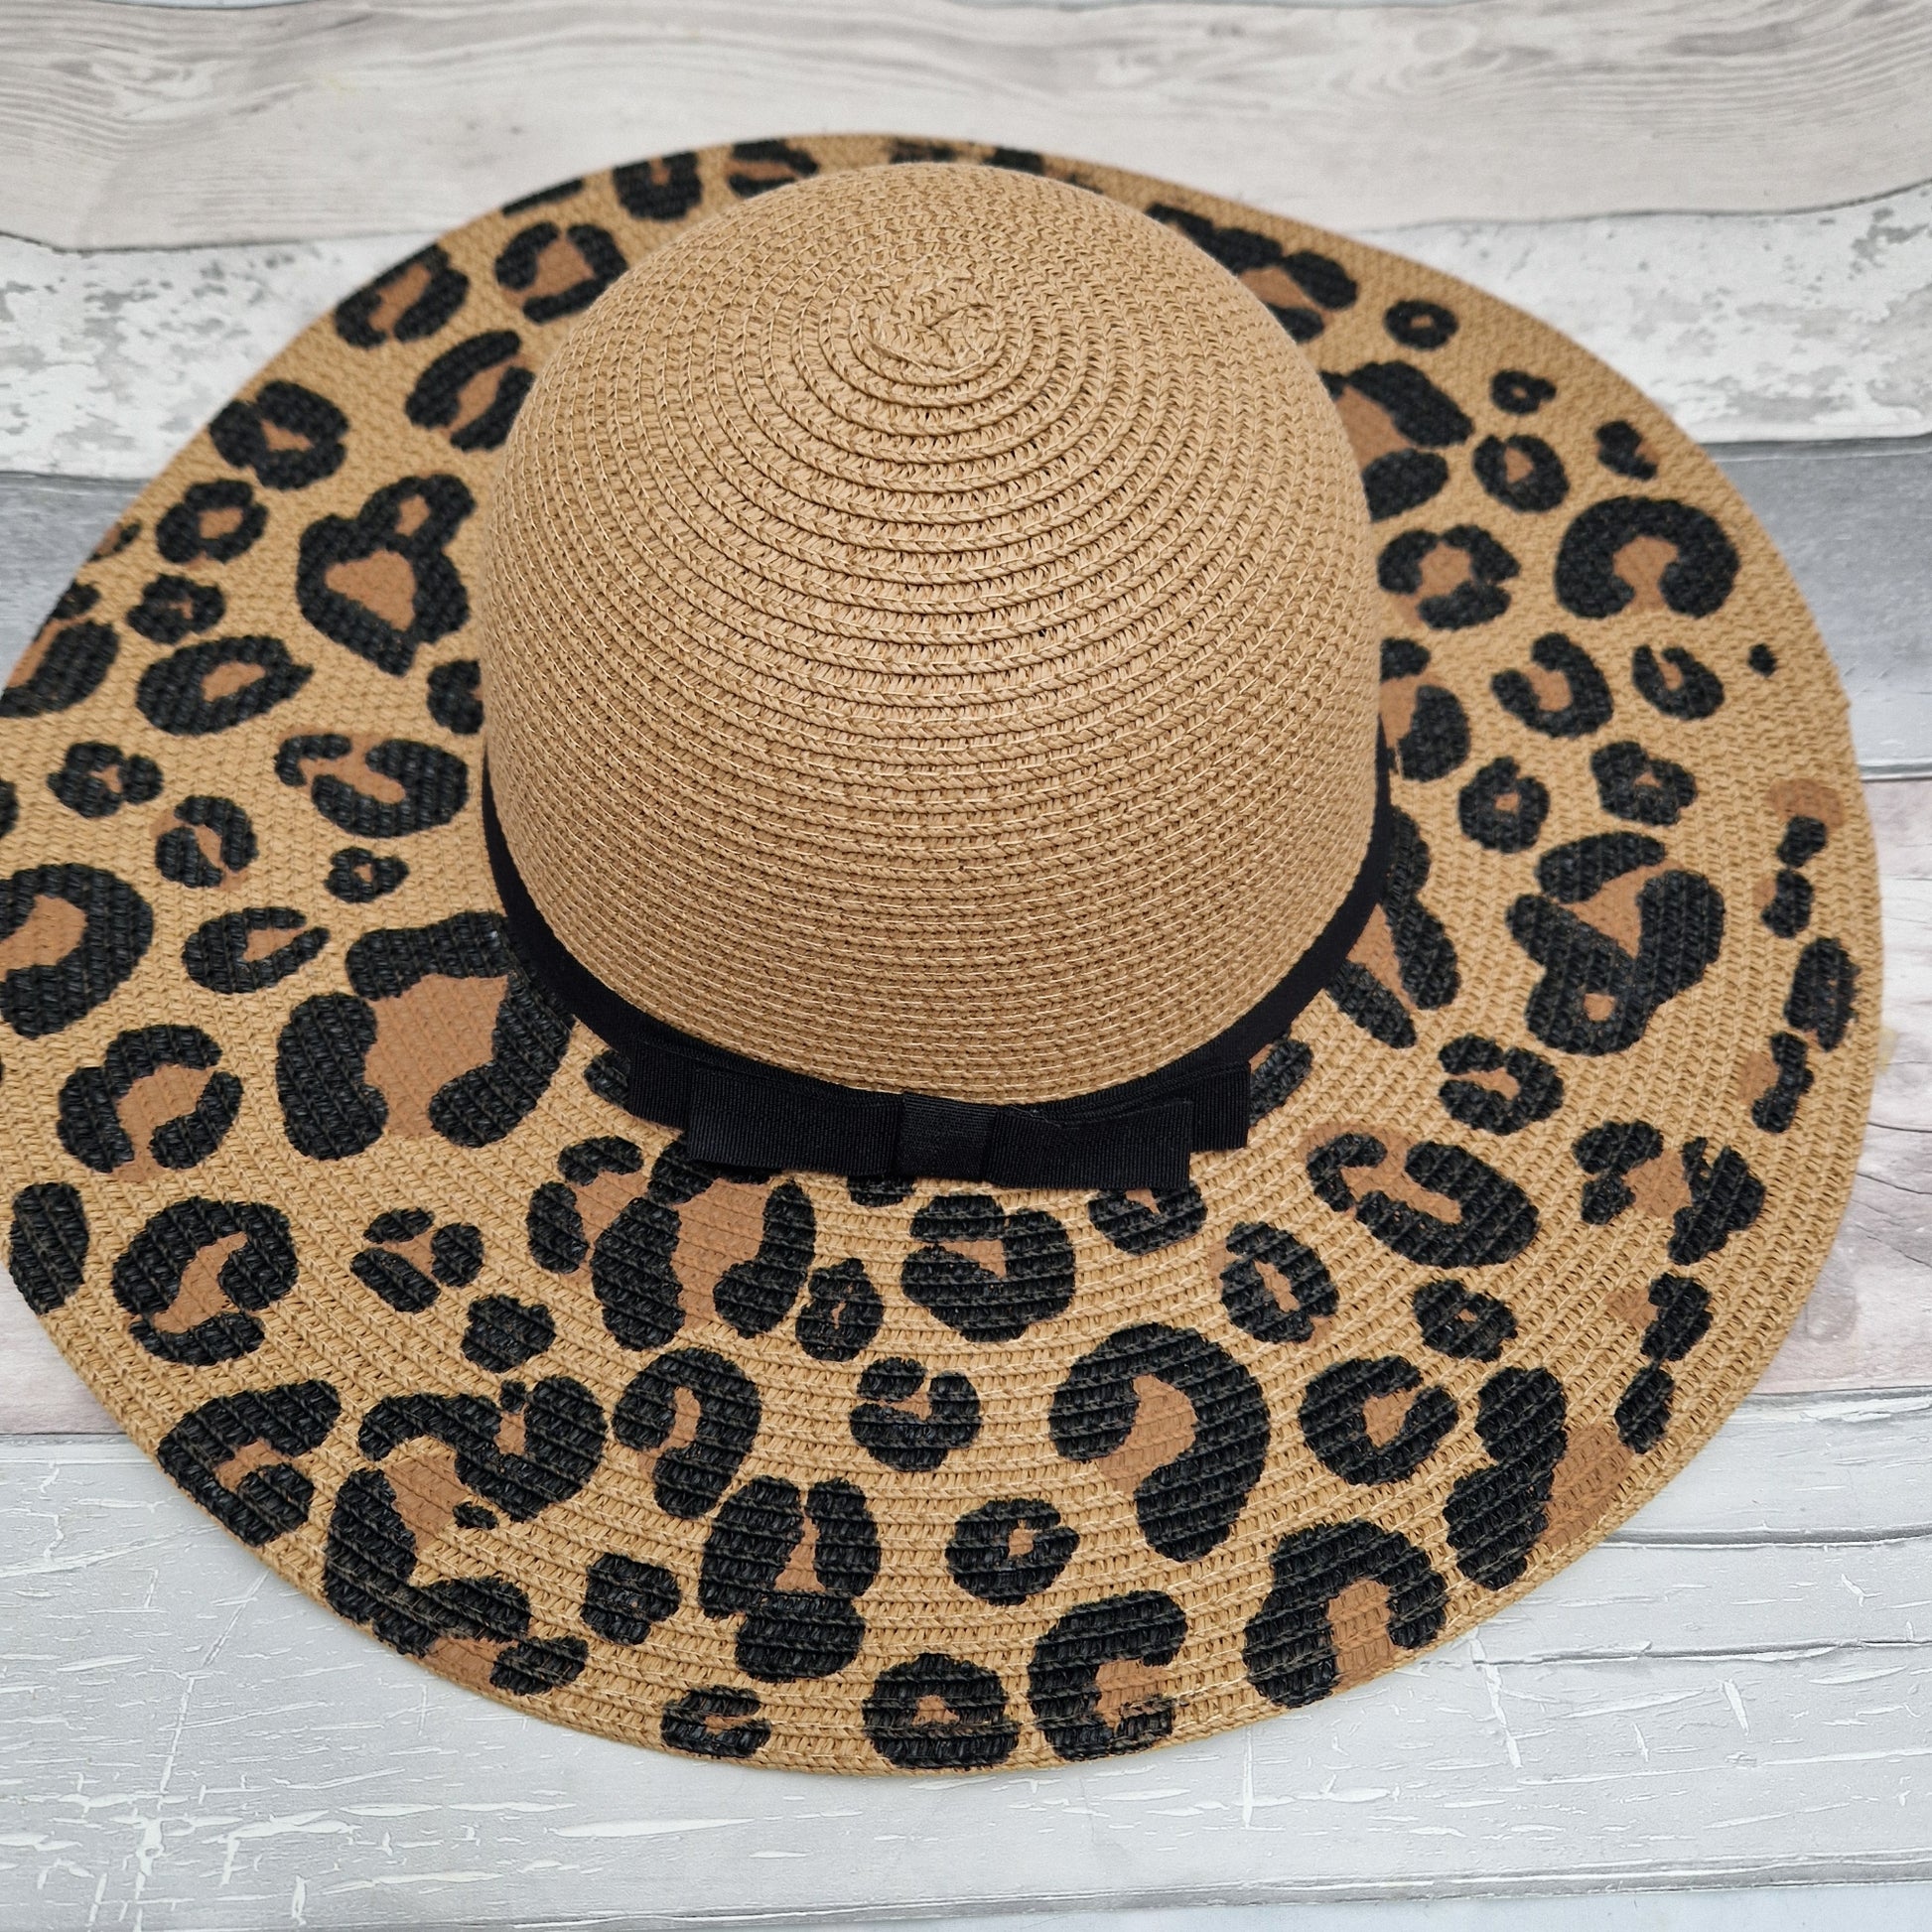 Wide brimmed biscuit coloured hat with leopard print across the brim and a black ribbon band.